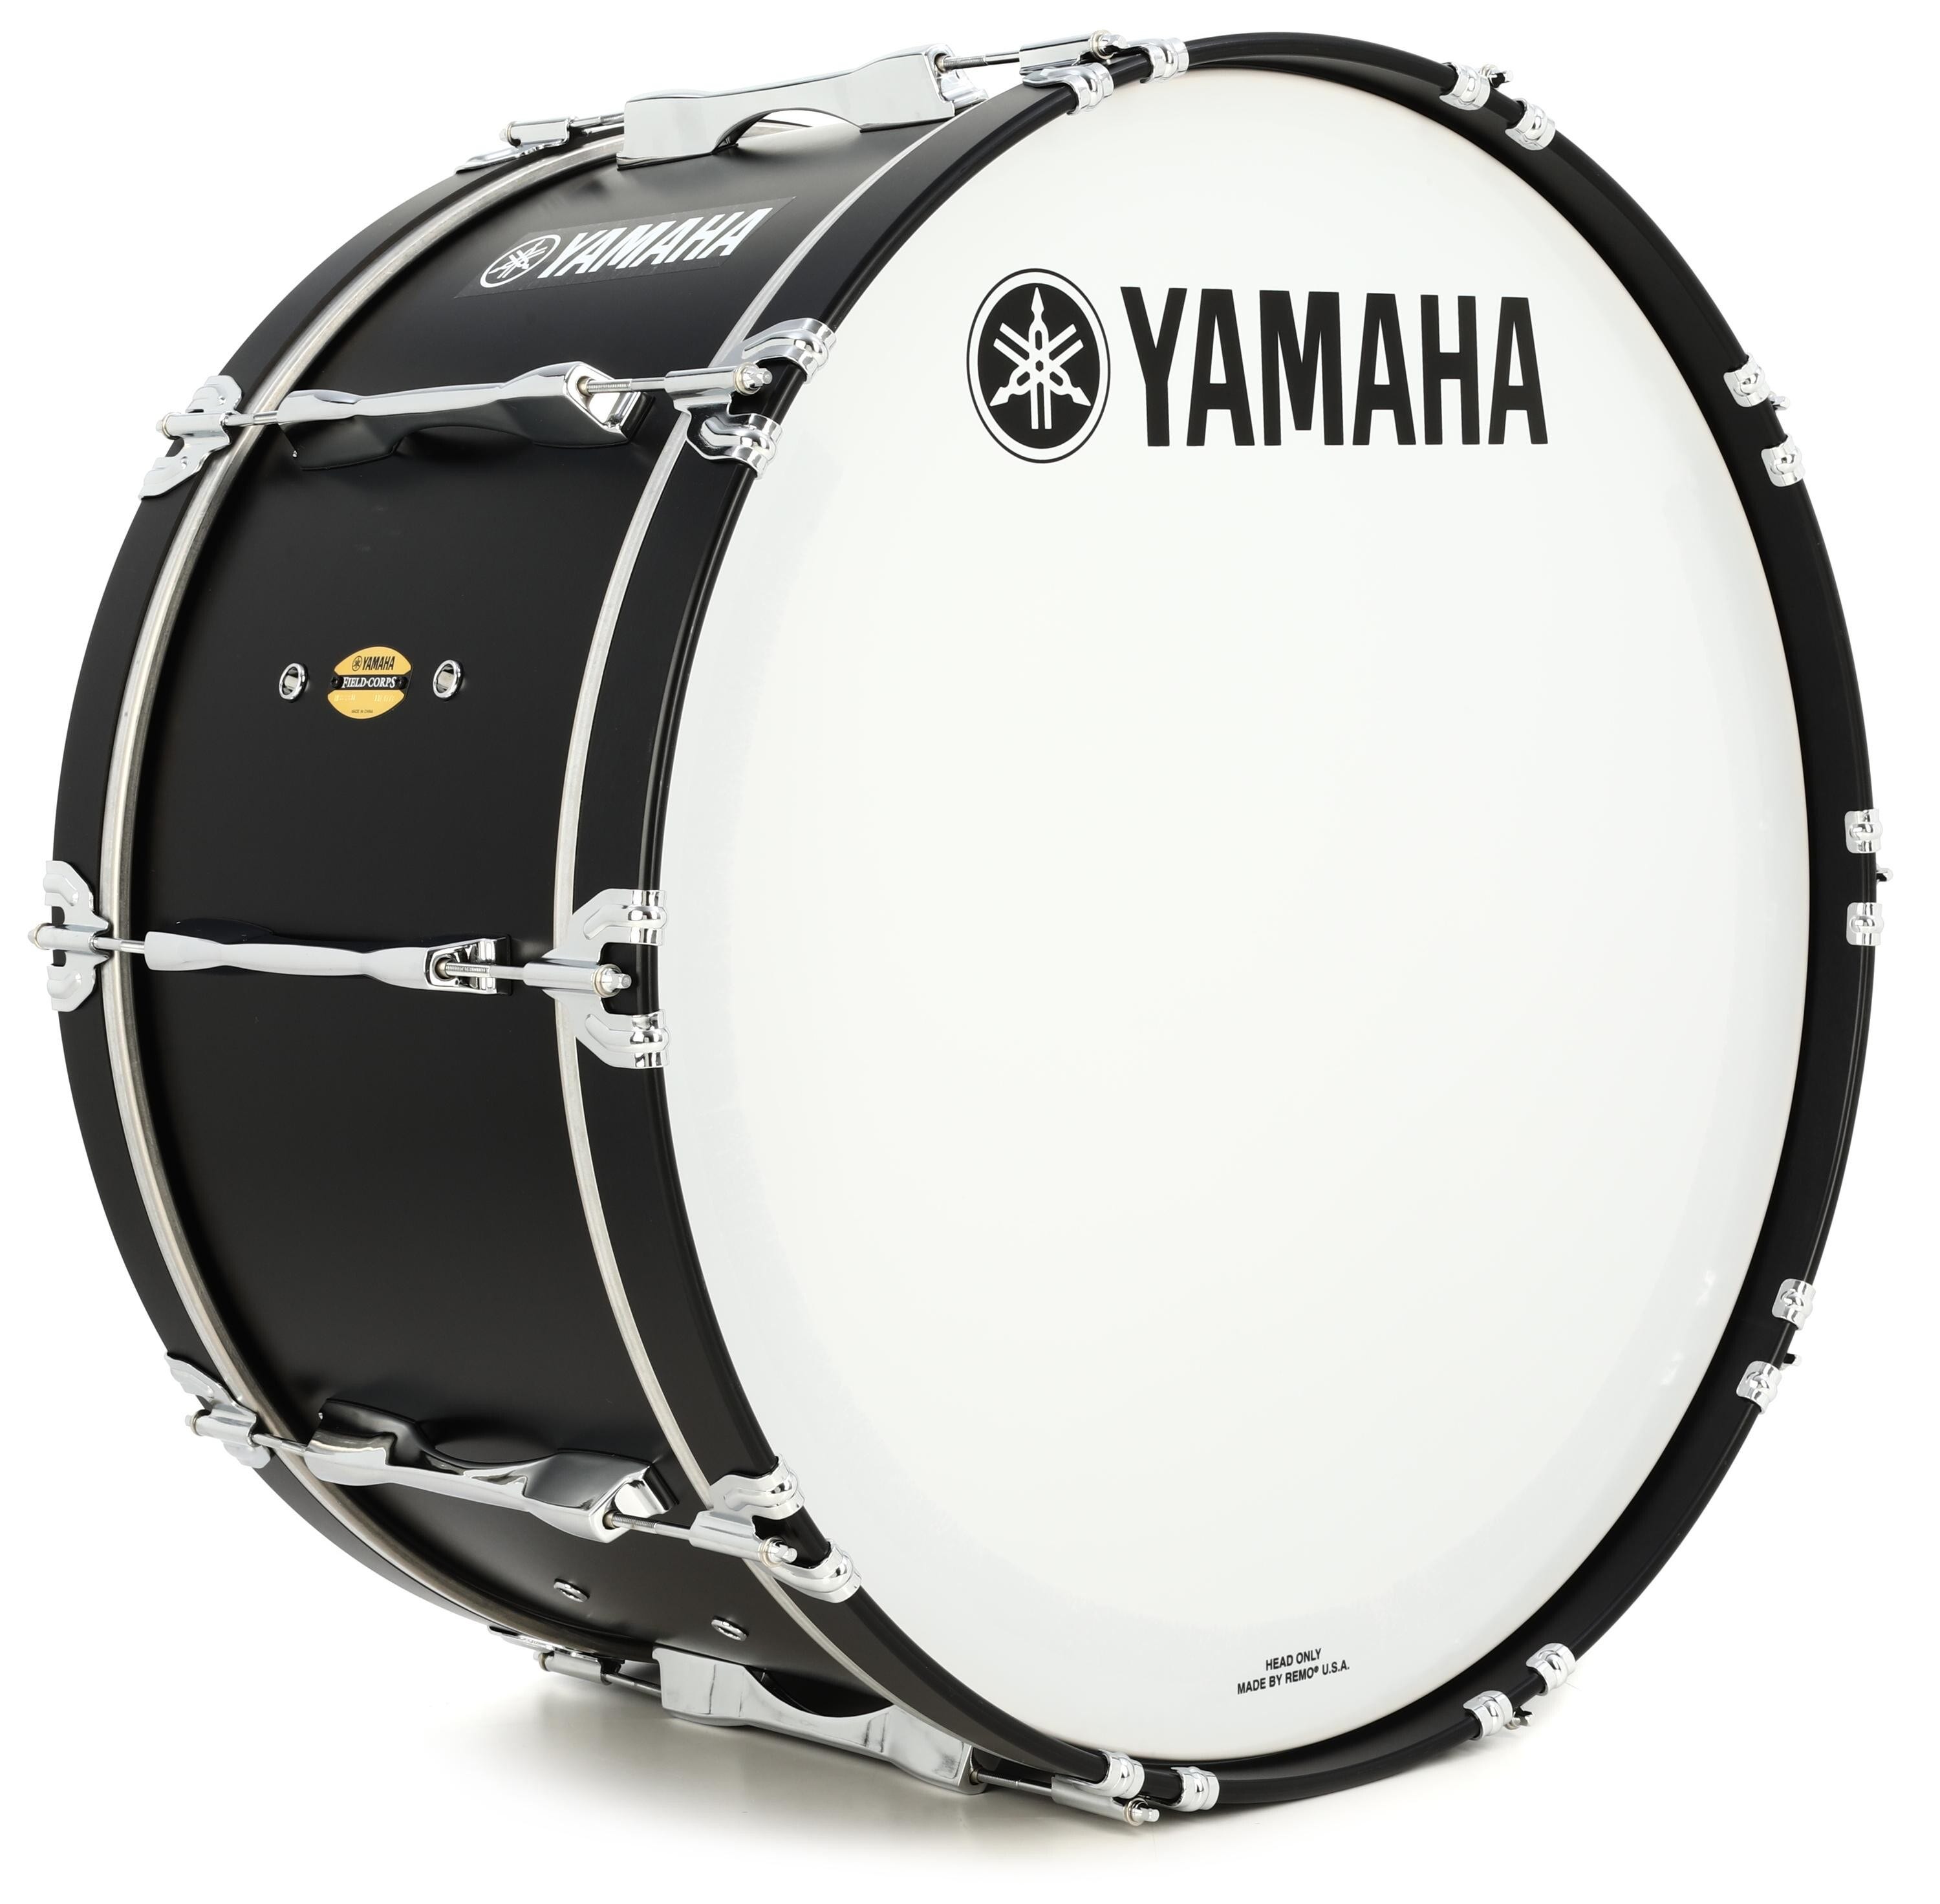 Yamaha 8300 Field-Corps Series 28 inch Marching Bass Drum - Black